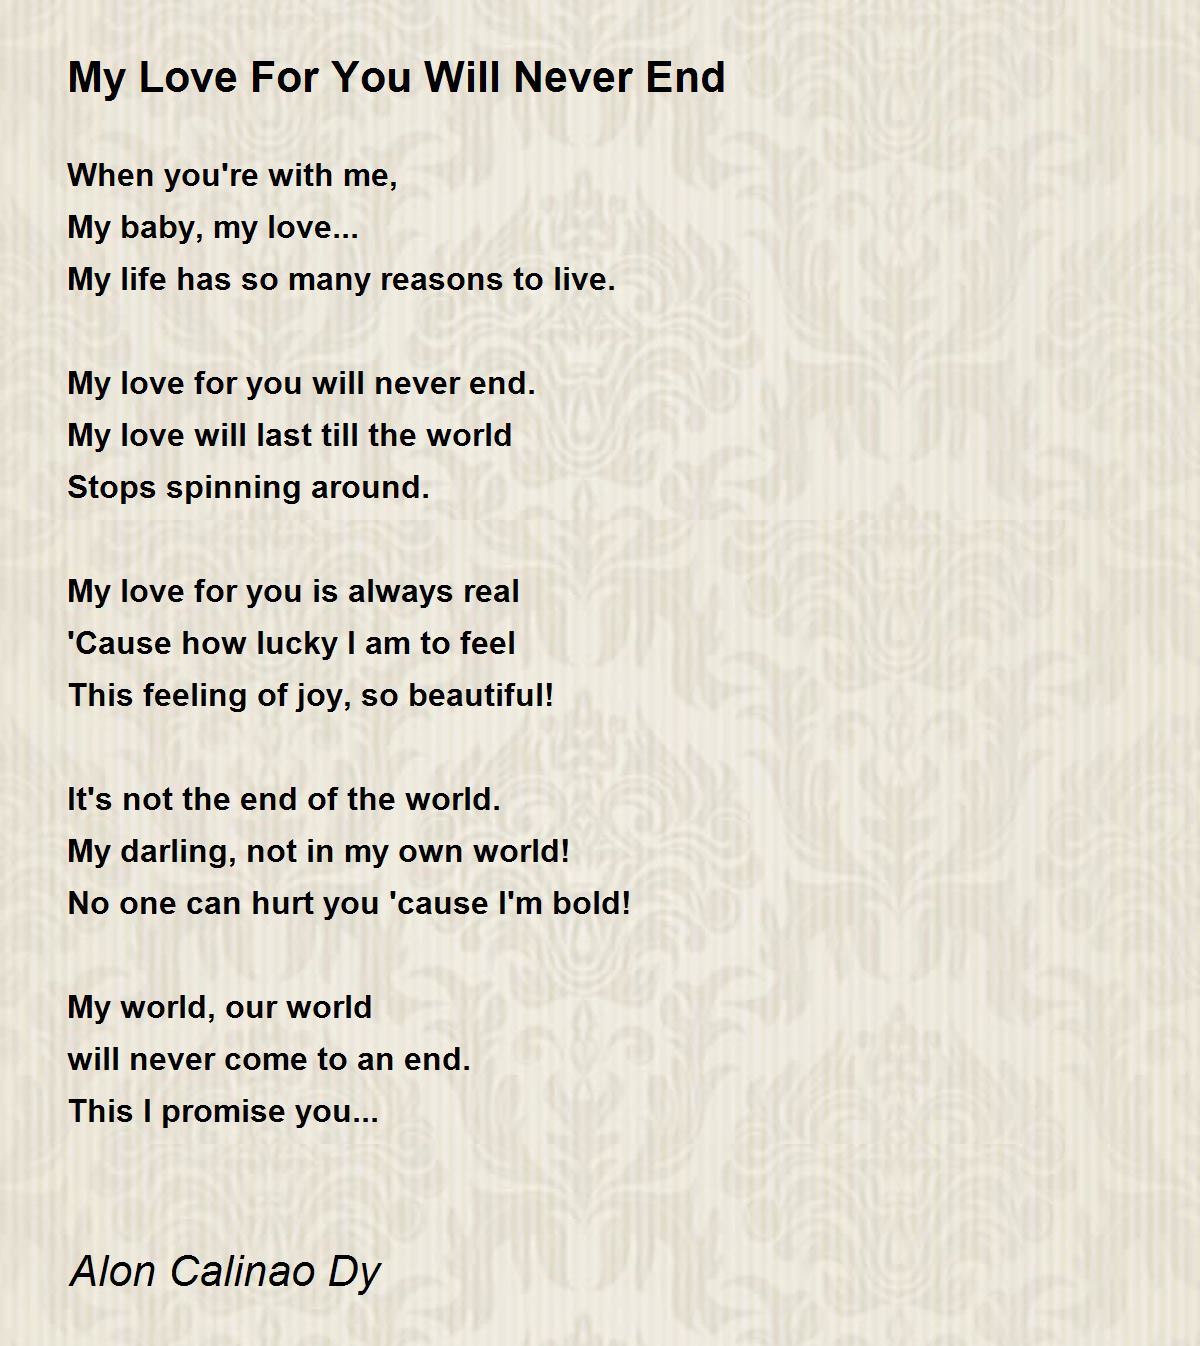 My Love For You Will Never End - My Love For You Will Never End Poem By Alon Calinao Dy